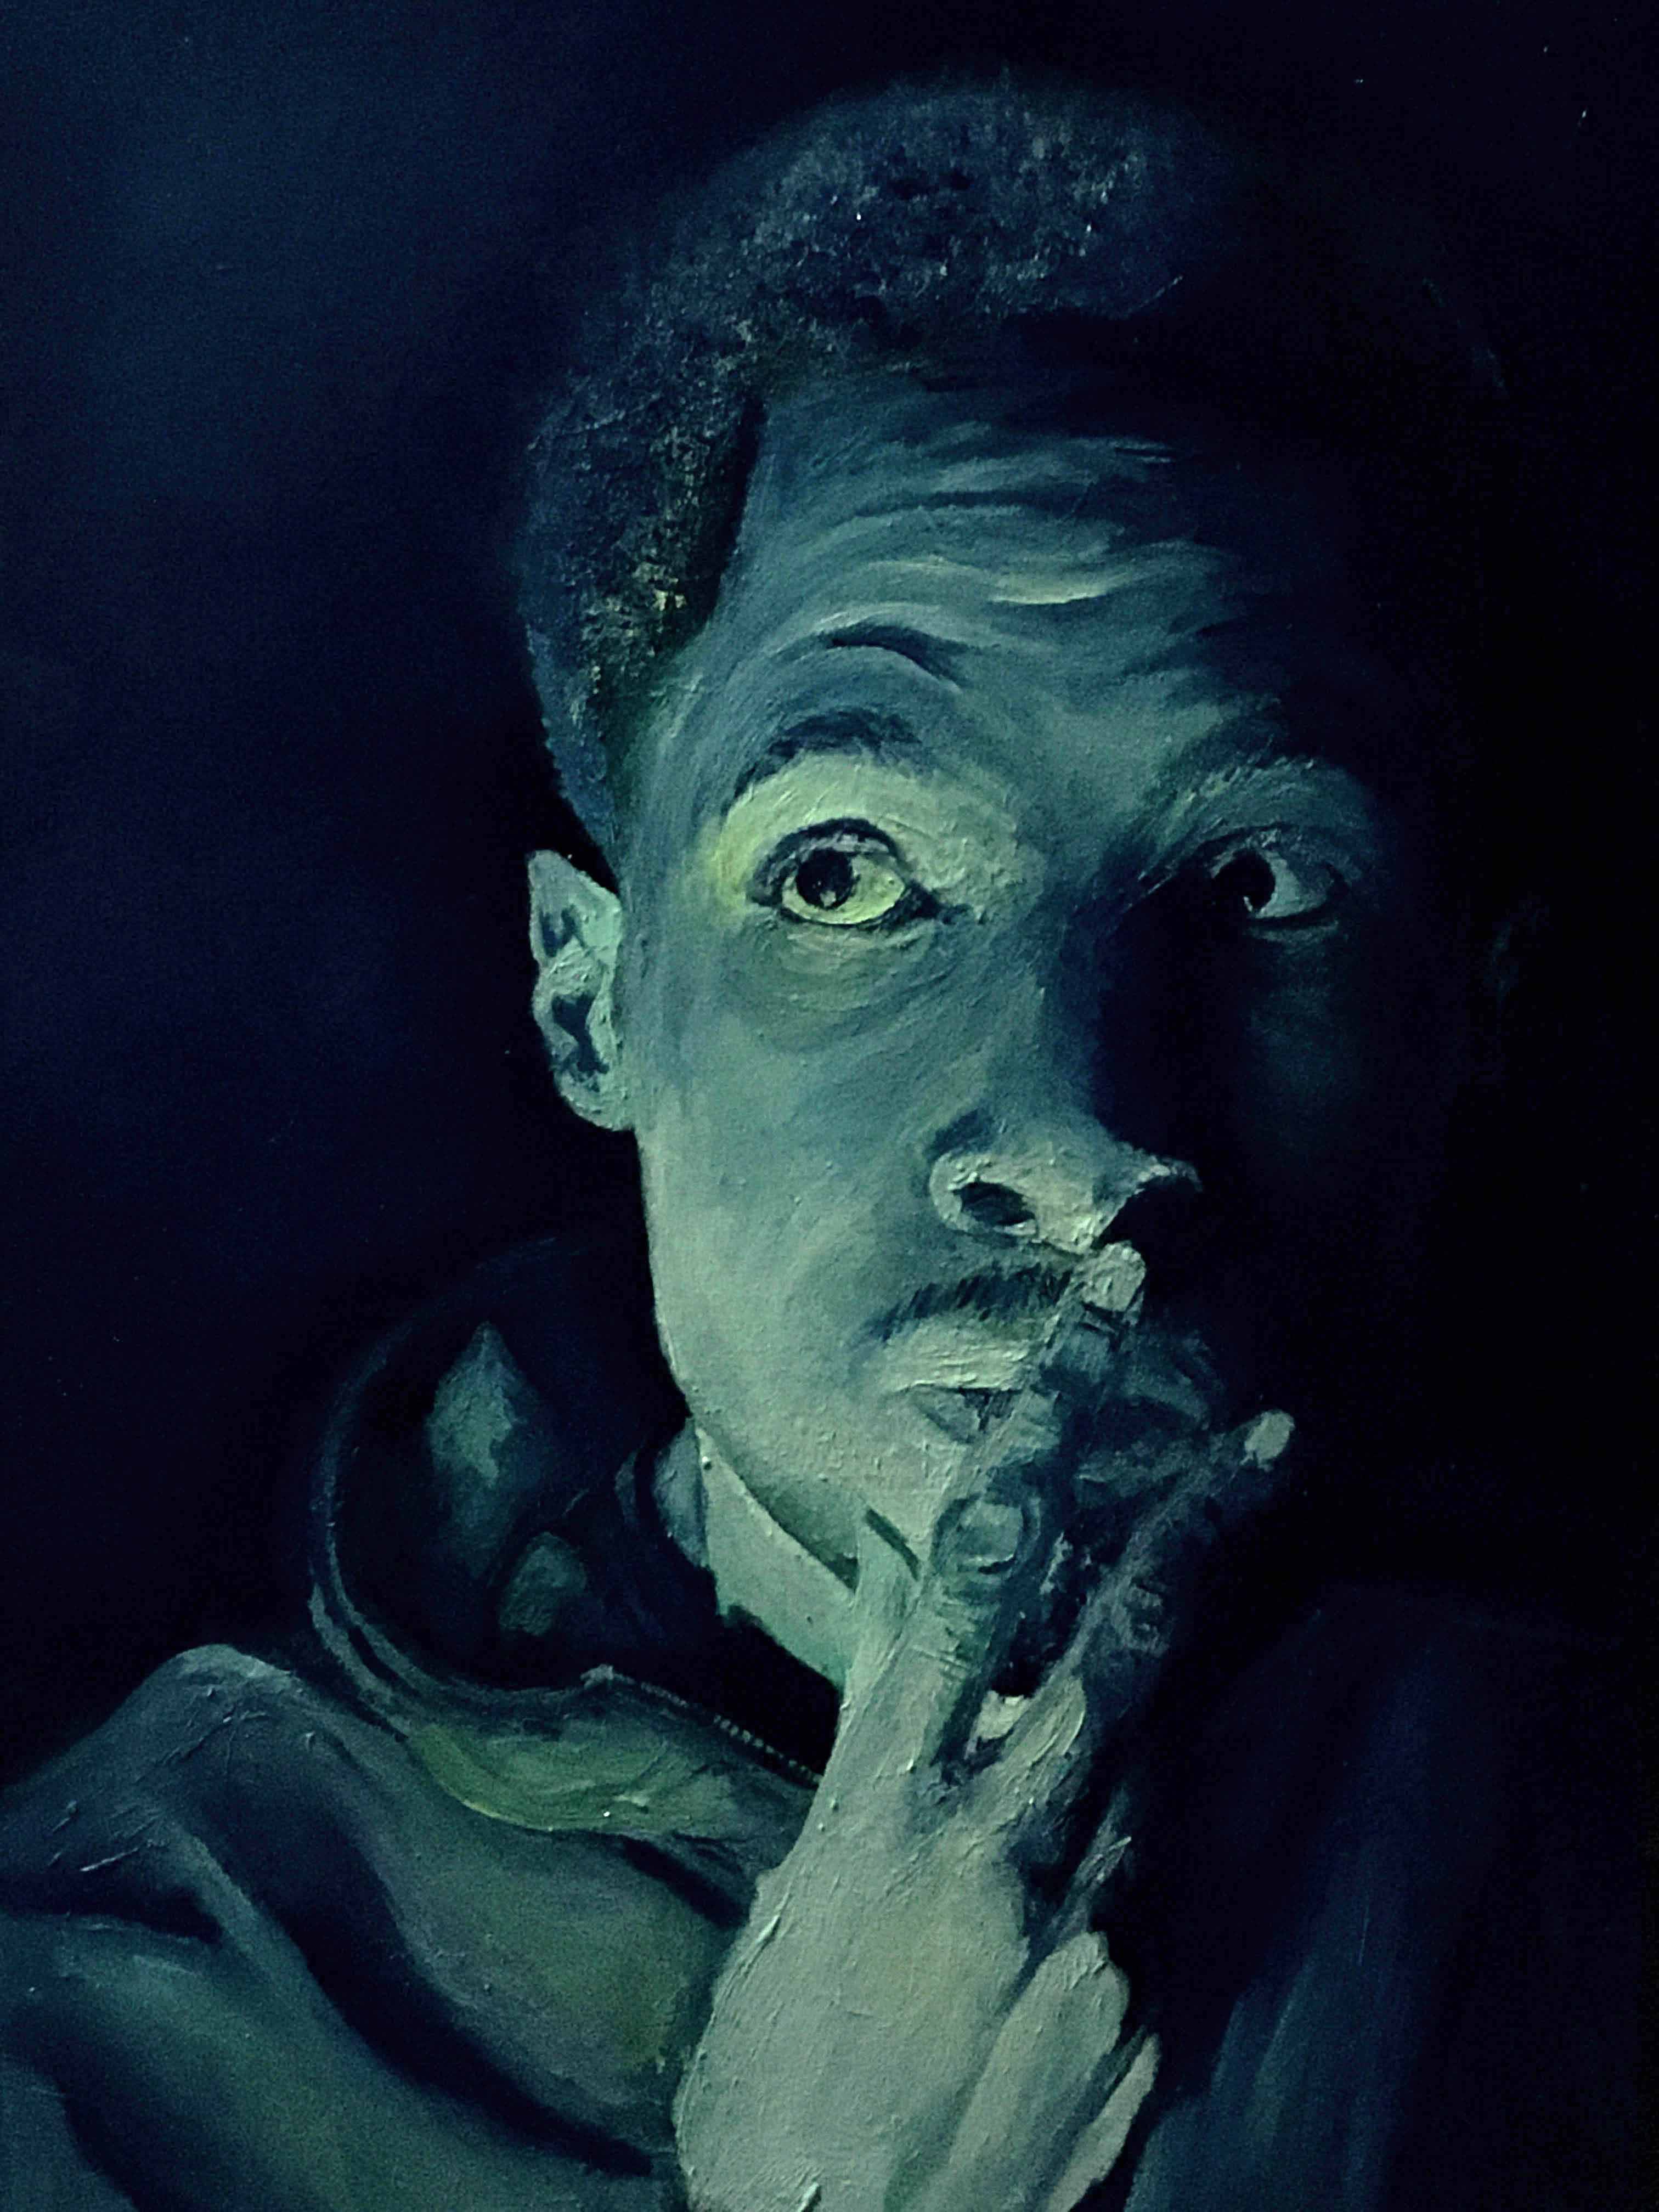 A man has his hands over his mouth in thought. He is in a dark room, but glowing light lights his face.